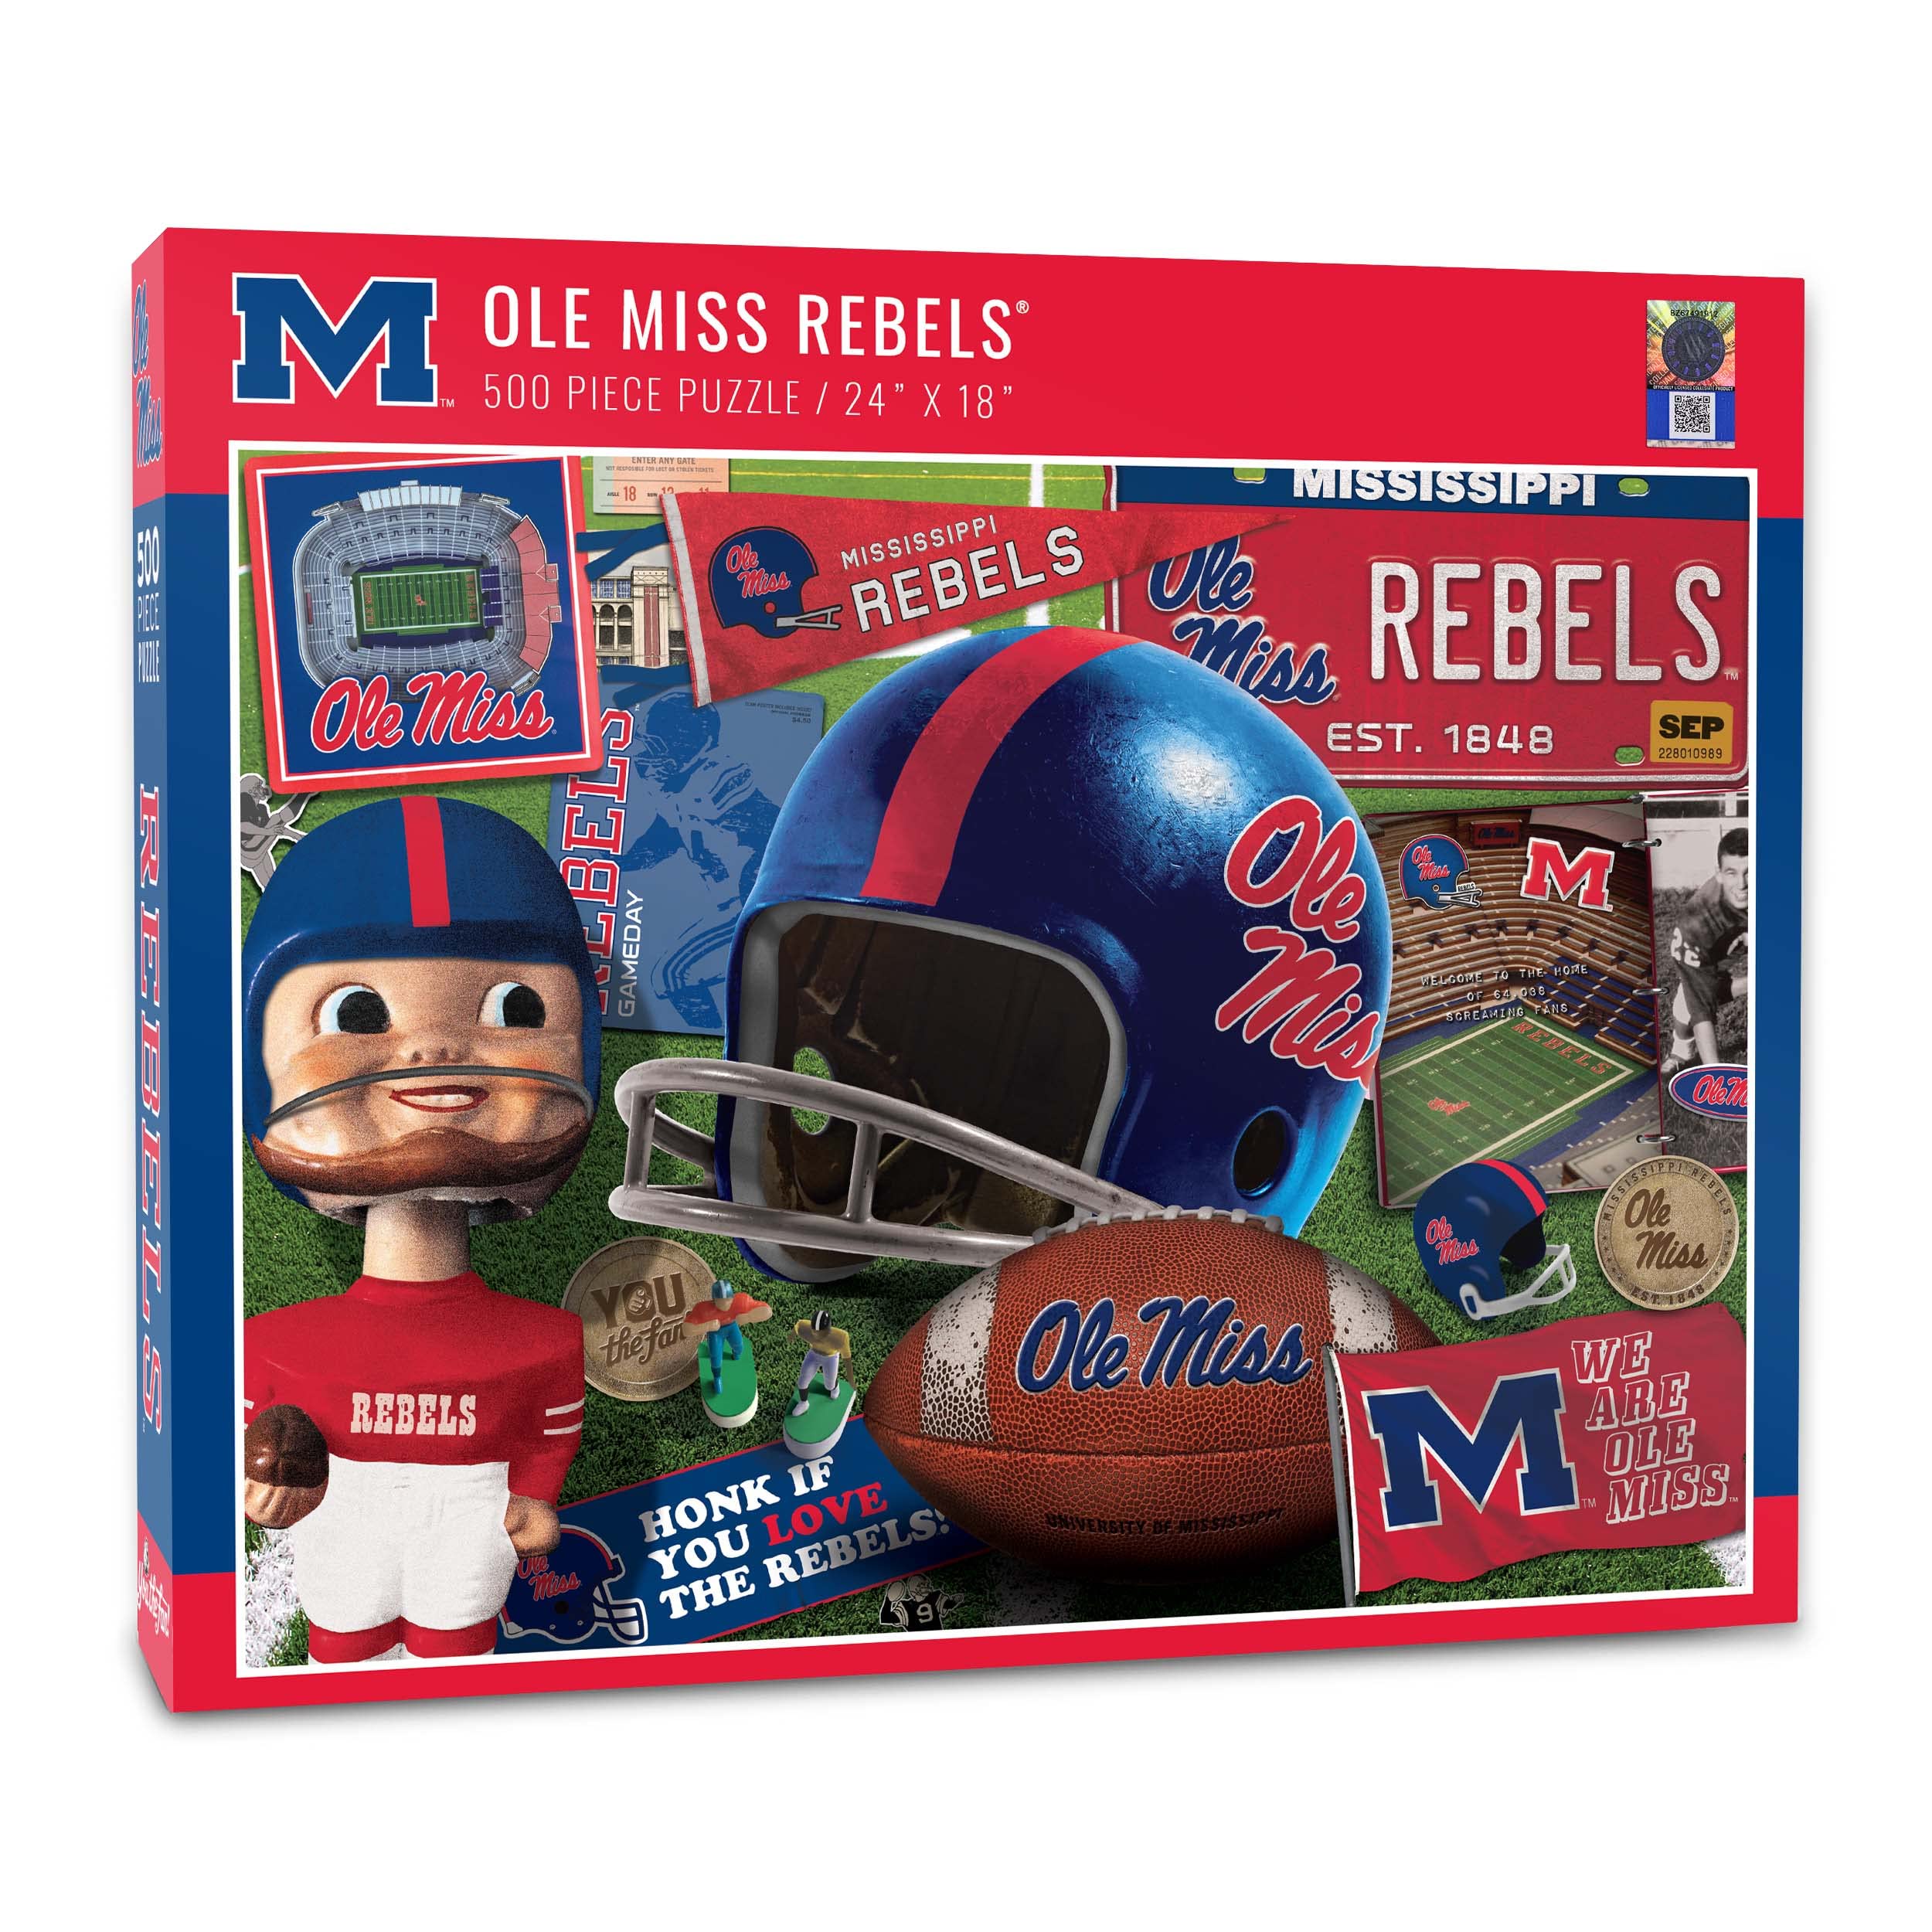 Youthefan Ncaa Mississippi Ole Miss Rebels Retro Series Puzzle - 500 Pieces, Team Colors, Large